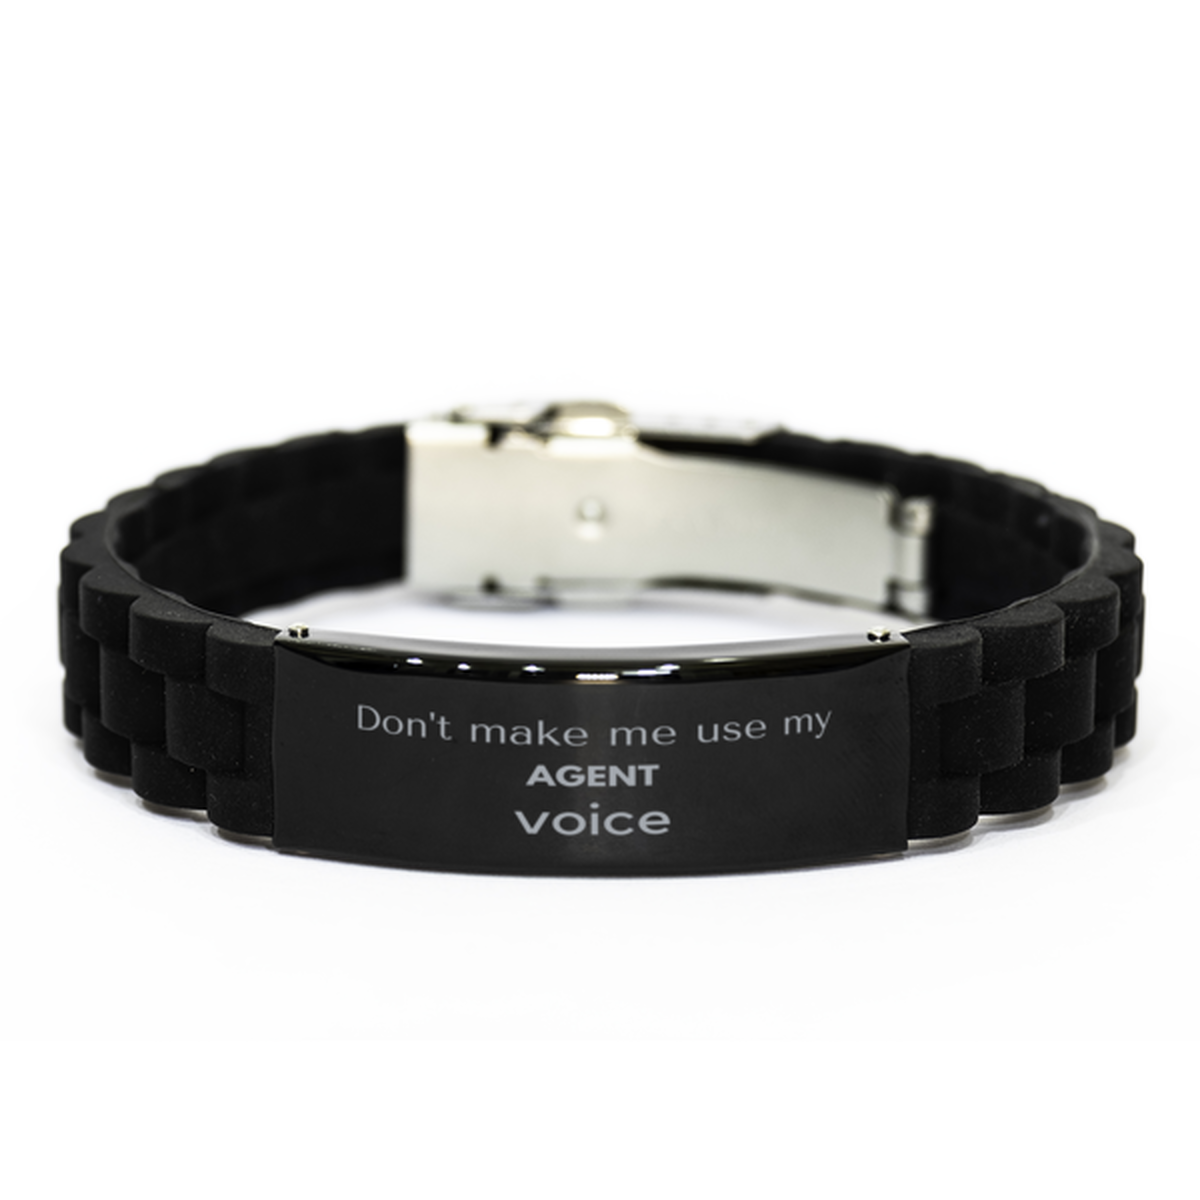 Don't make me use my Agent voice, Sarcasm Agent Gifts, Christmas Agent Black Glidelock Clasp Bracelet Birthday Unique Gifts For Agent Coworkers, Men, Women, Colleague, Friends